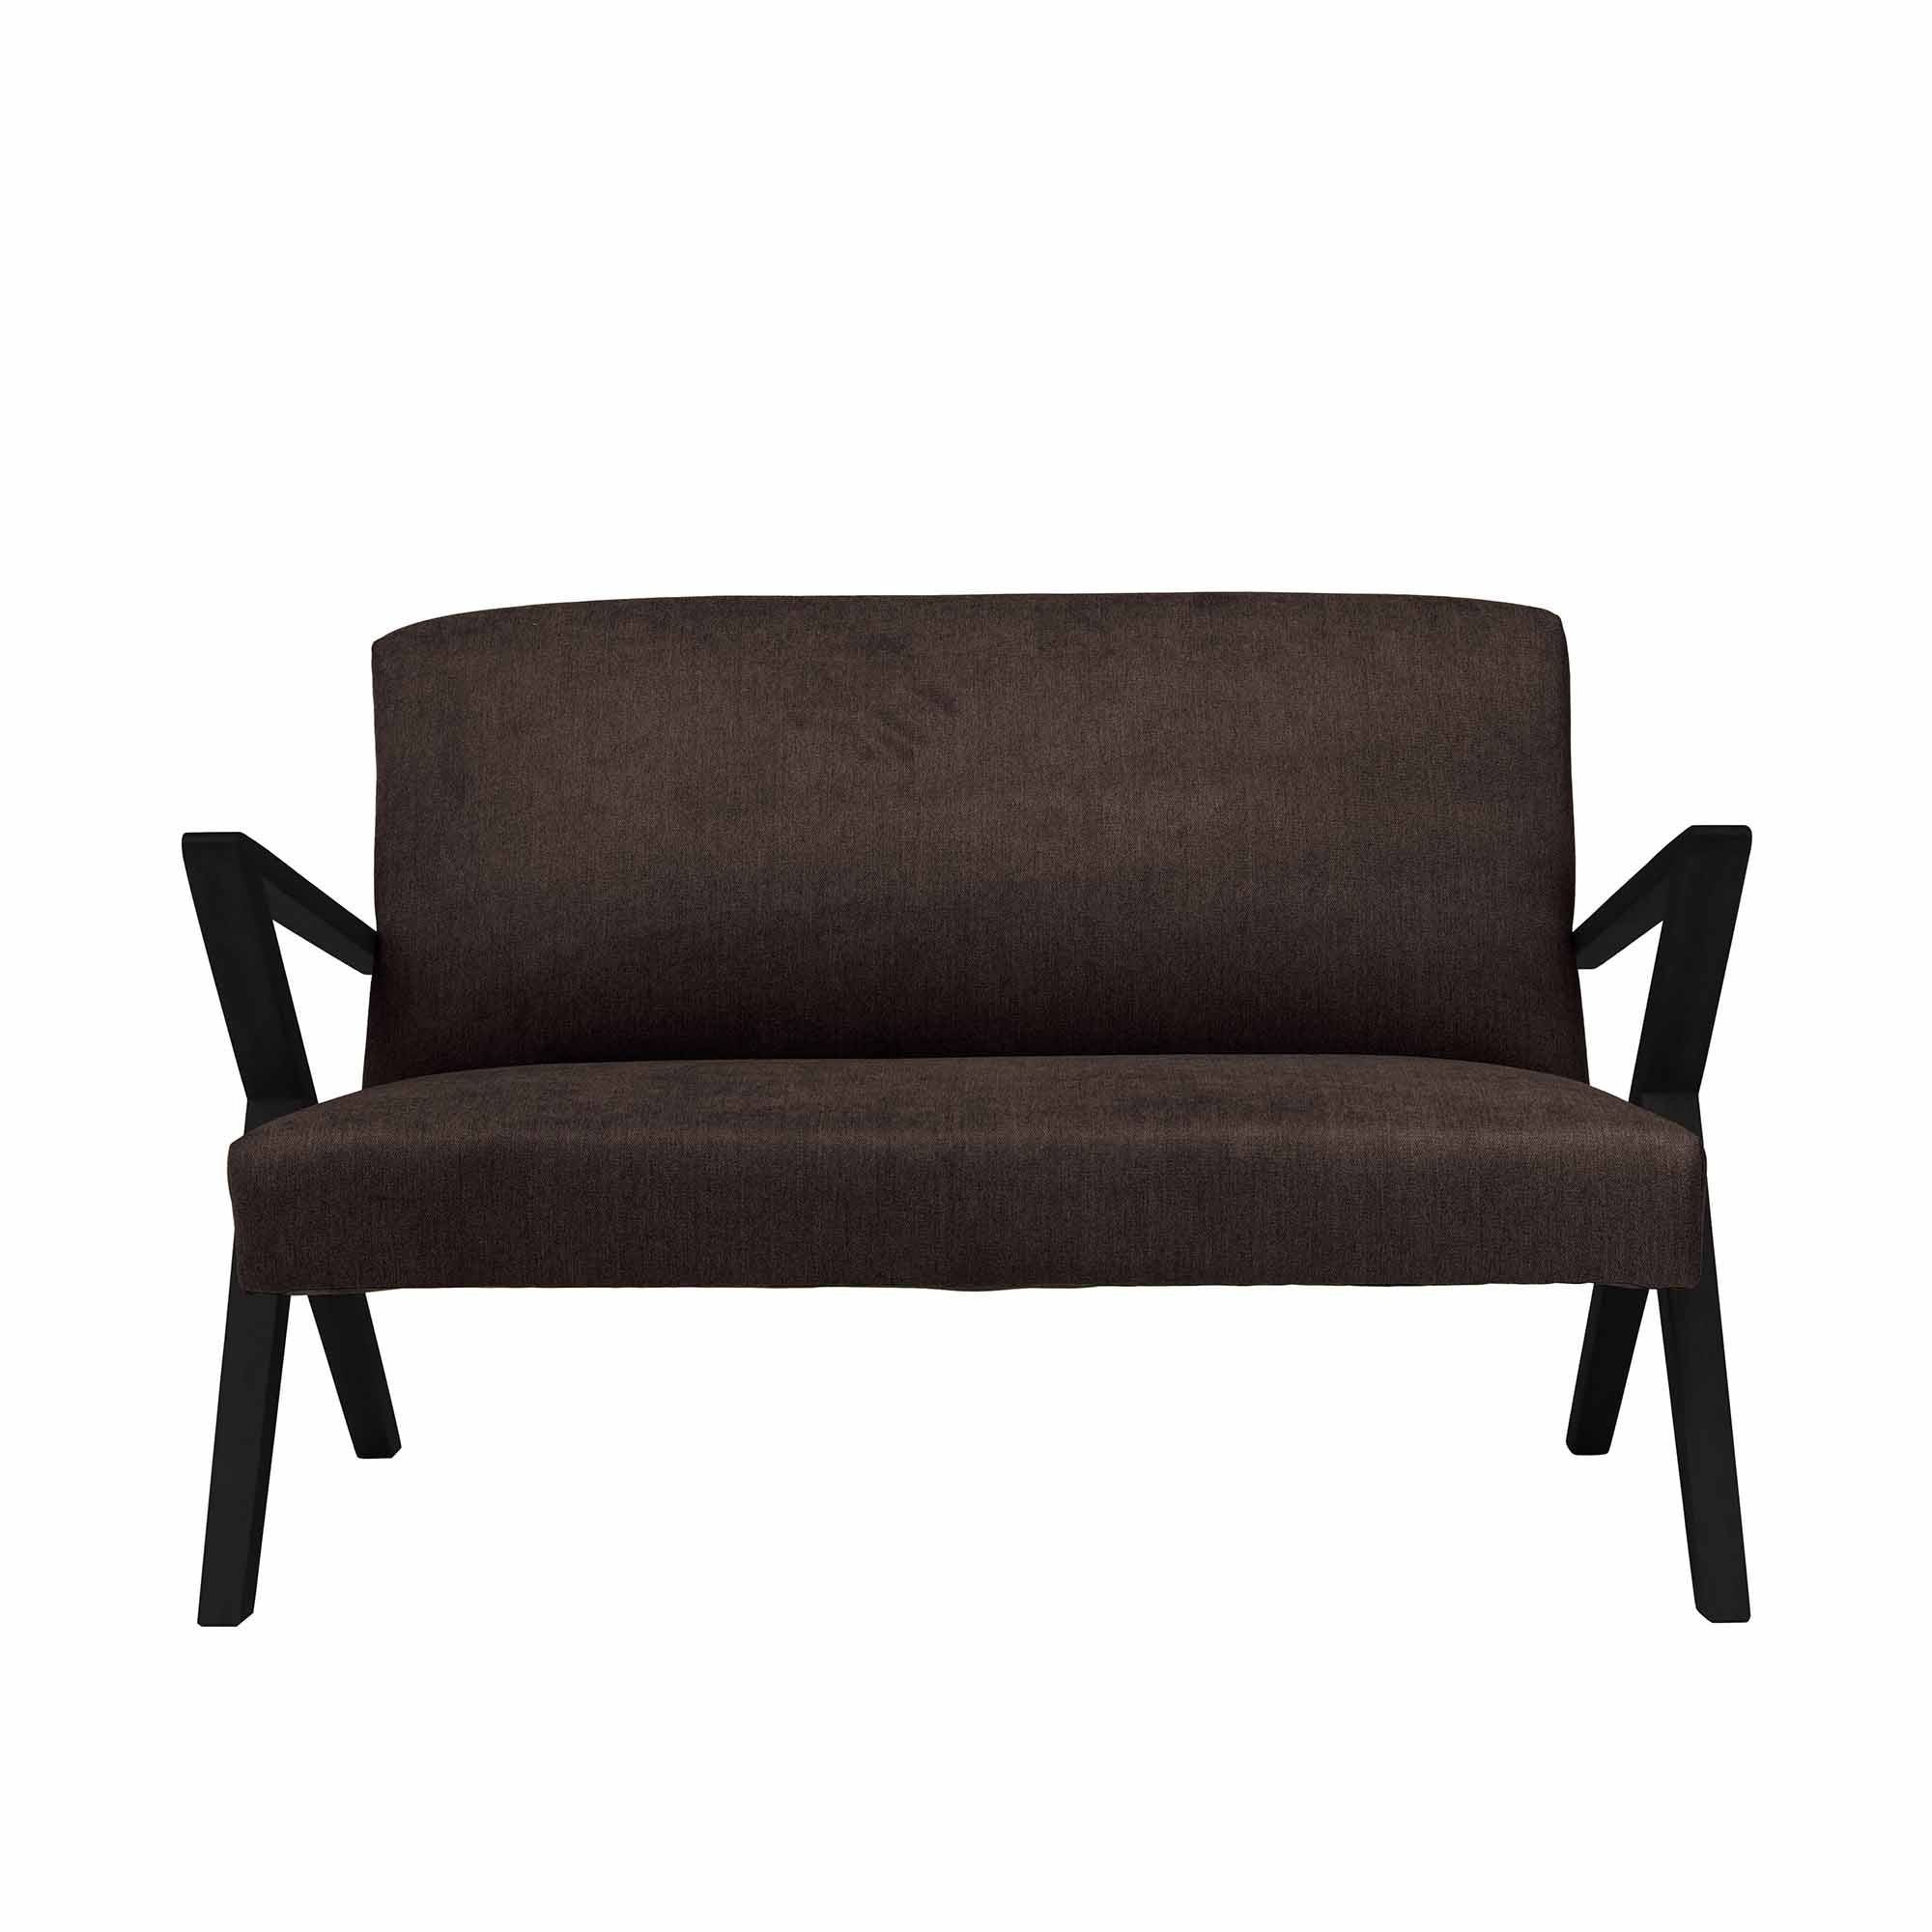 2-Seater Sofa, Beech Wood Frame, Black Lacquered brown fabric, front view